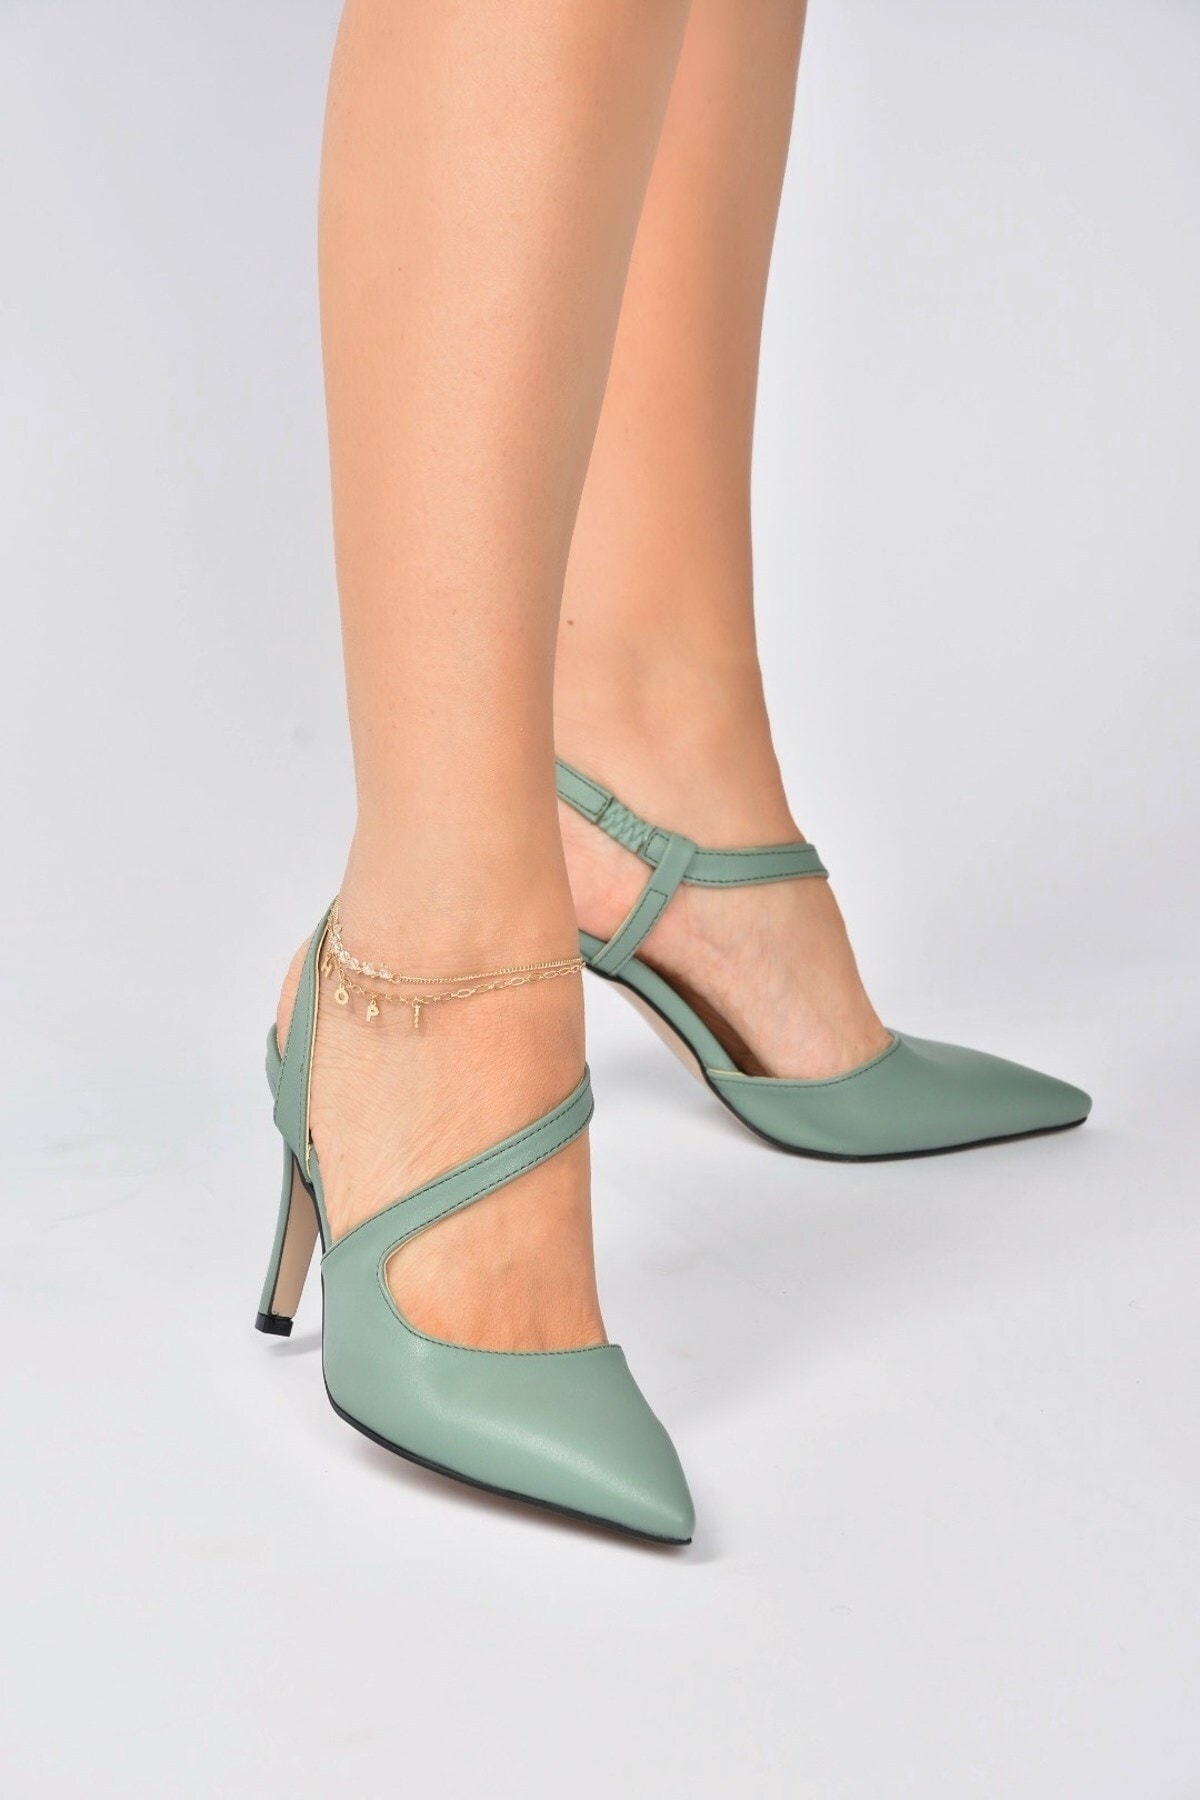 Fox Shoes Women's Green Pointed Toe Heeled Shoes